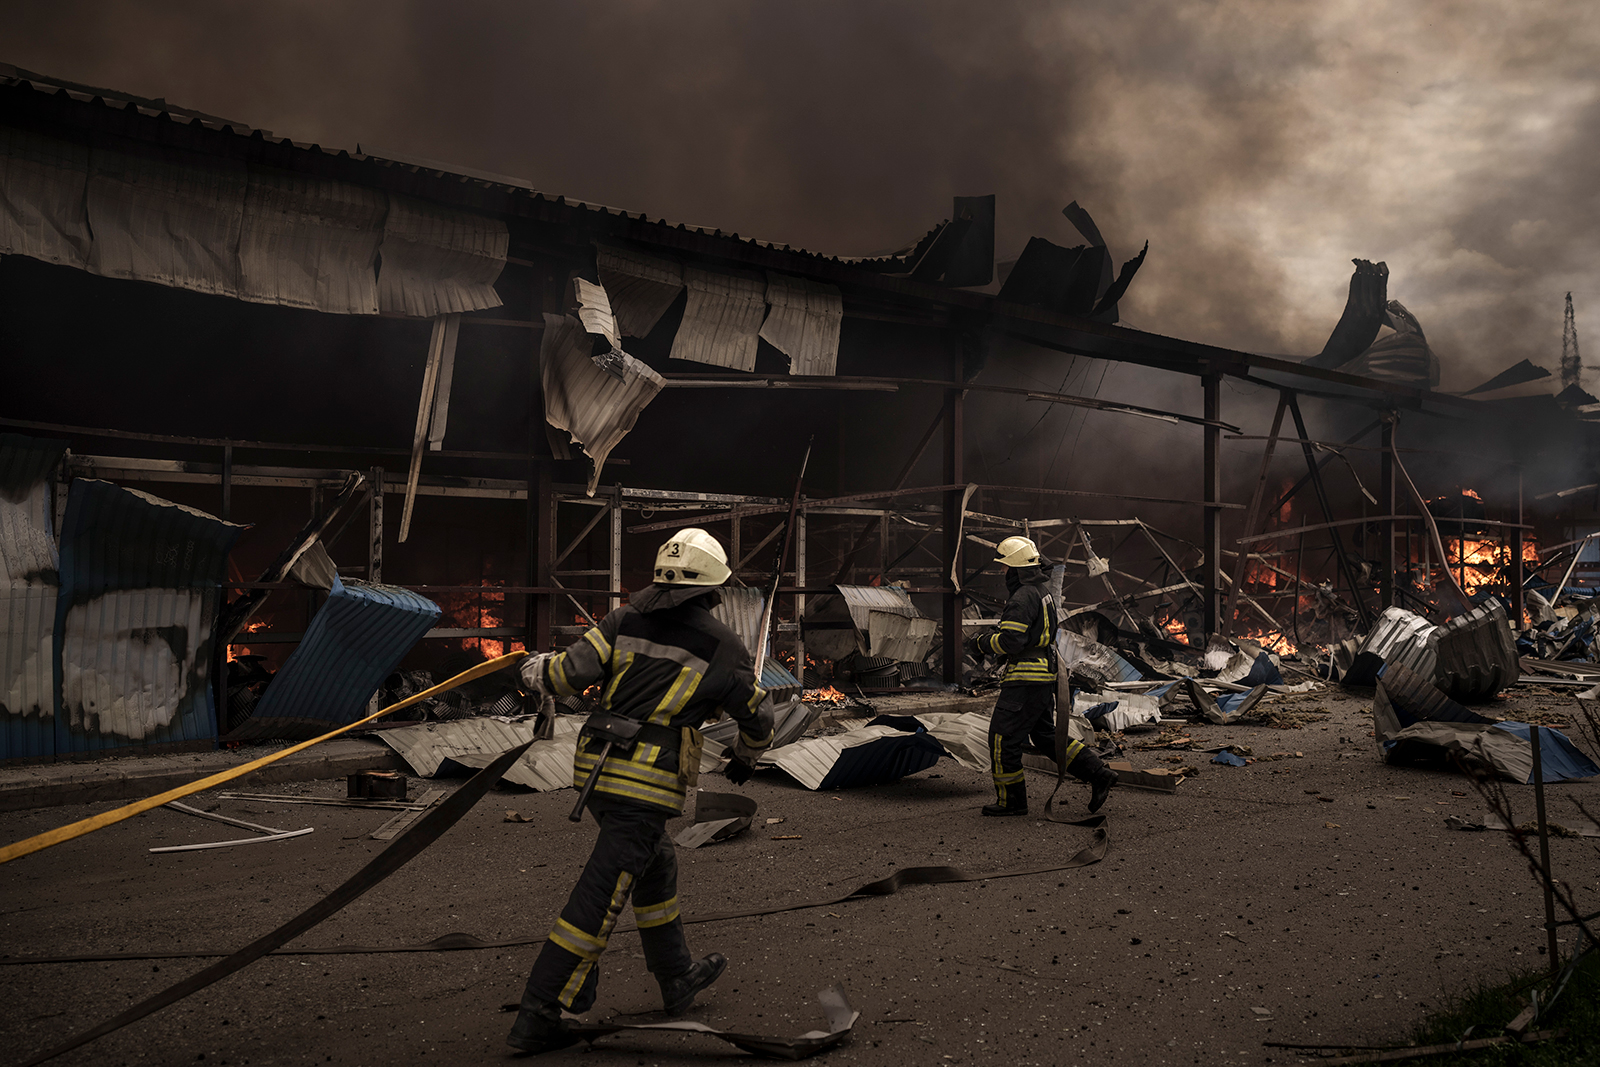 Firefighters work to put out a fire at a warehouse in the middle of Russian bombings in Kharkiv, Ukraine, on Saturday, April 23.